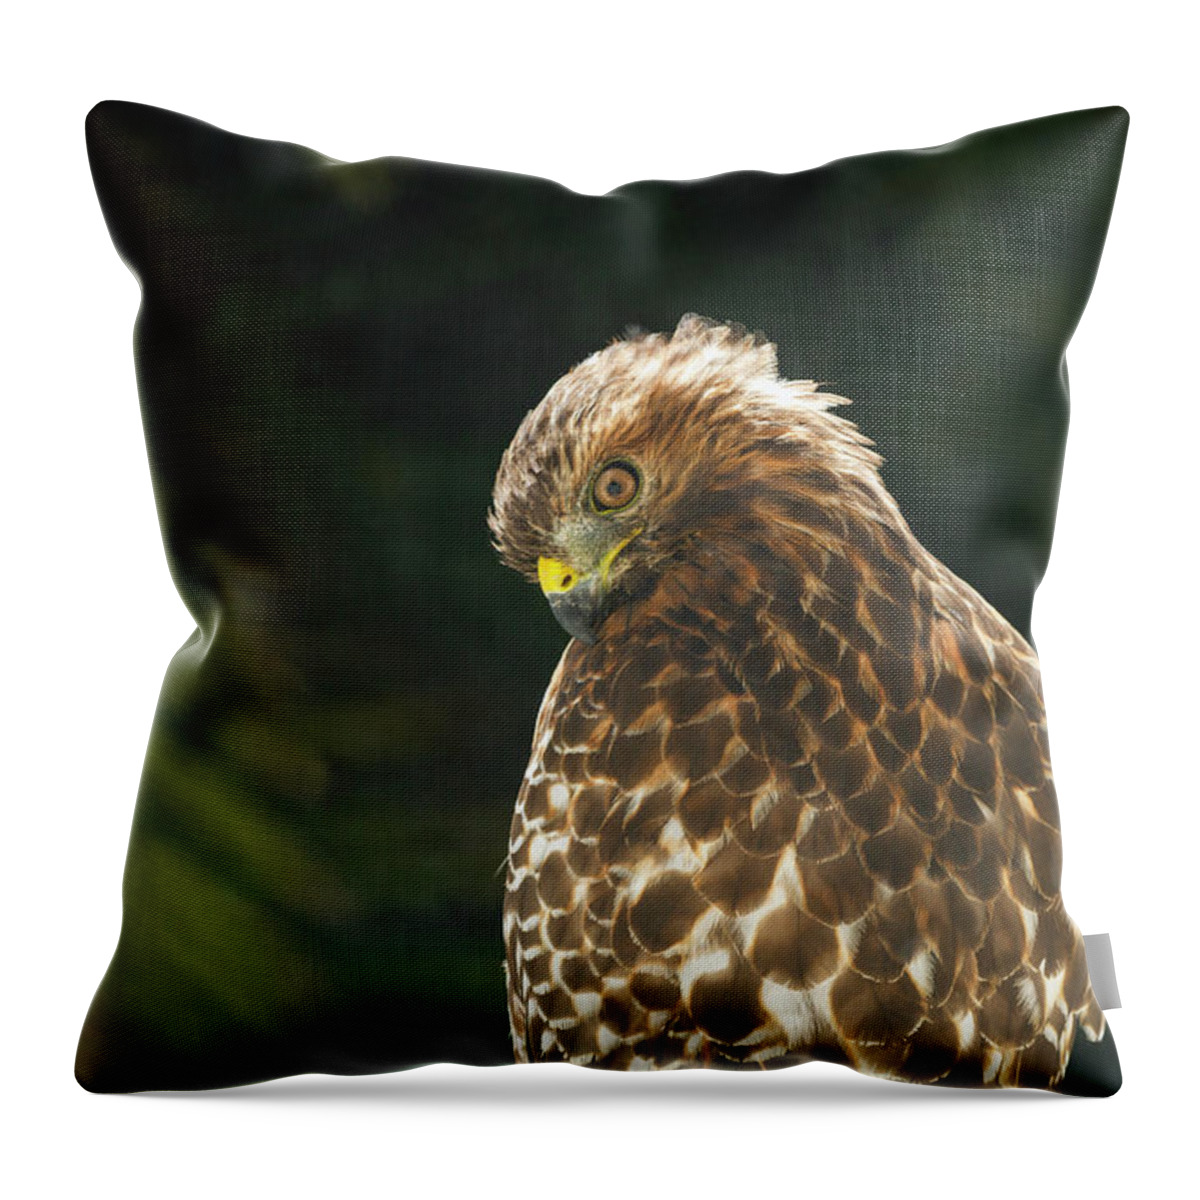 Who Ya Lookin At Throw Pillow featuring the photograph Who Ya Lookin At by Bonnie Follett